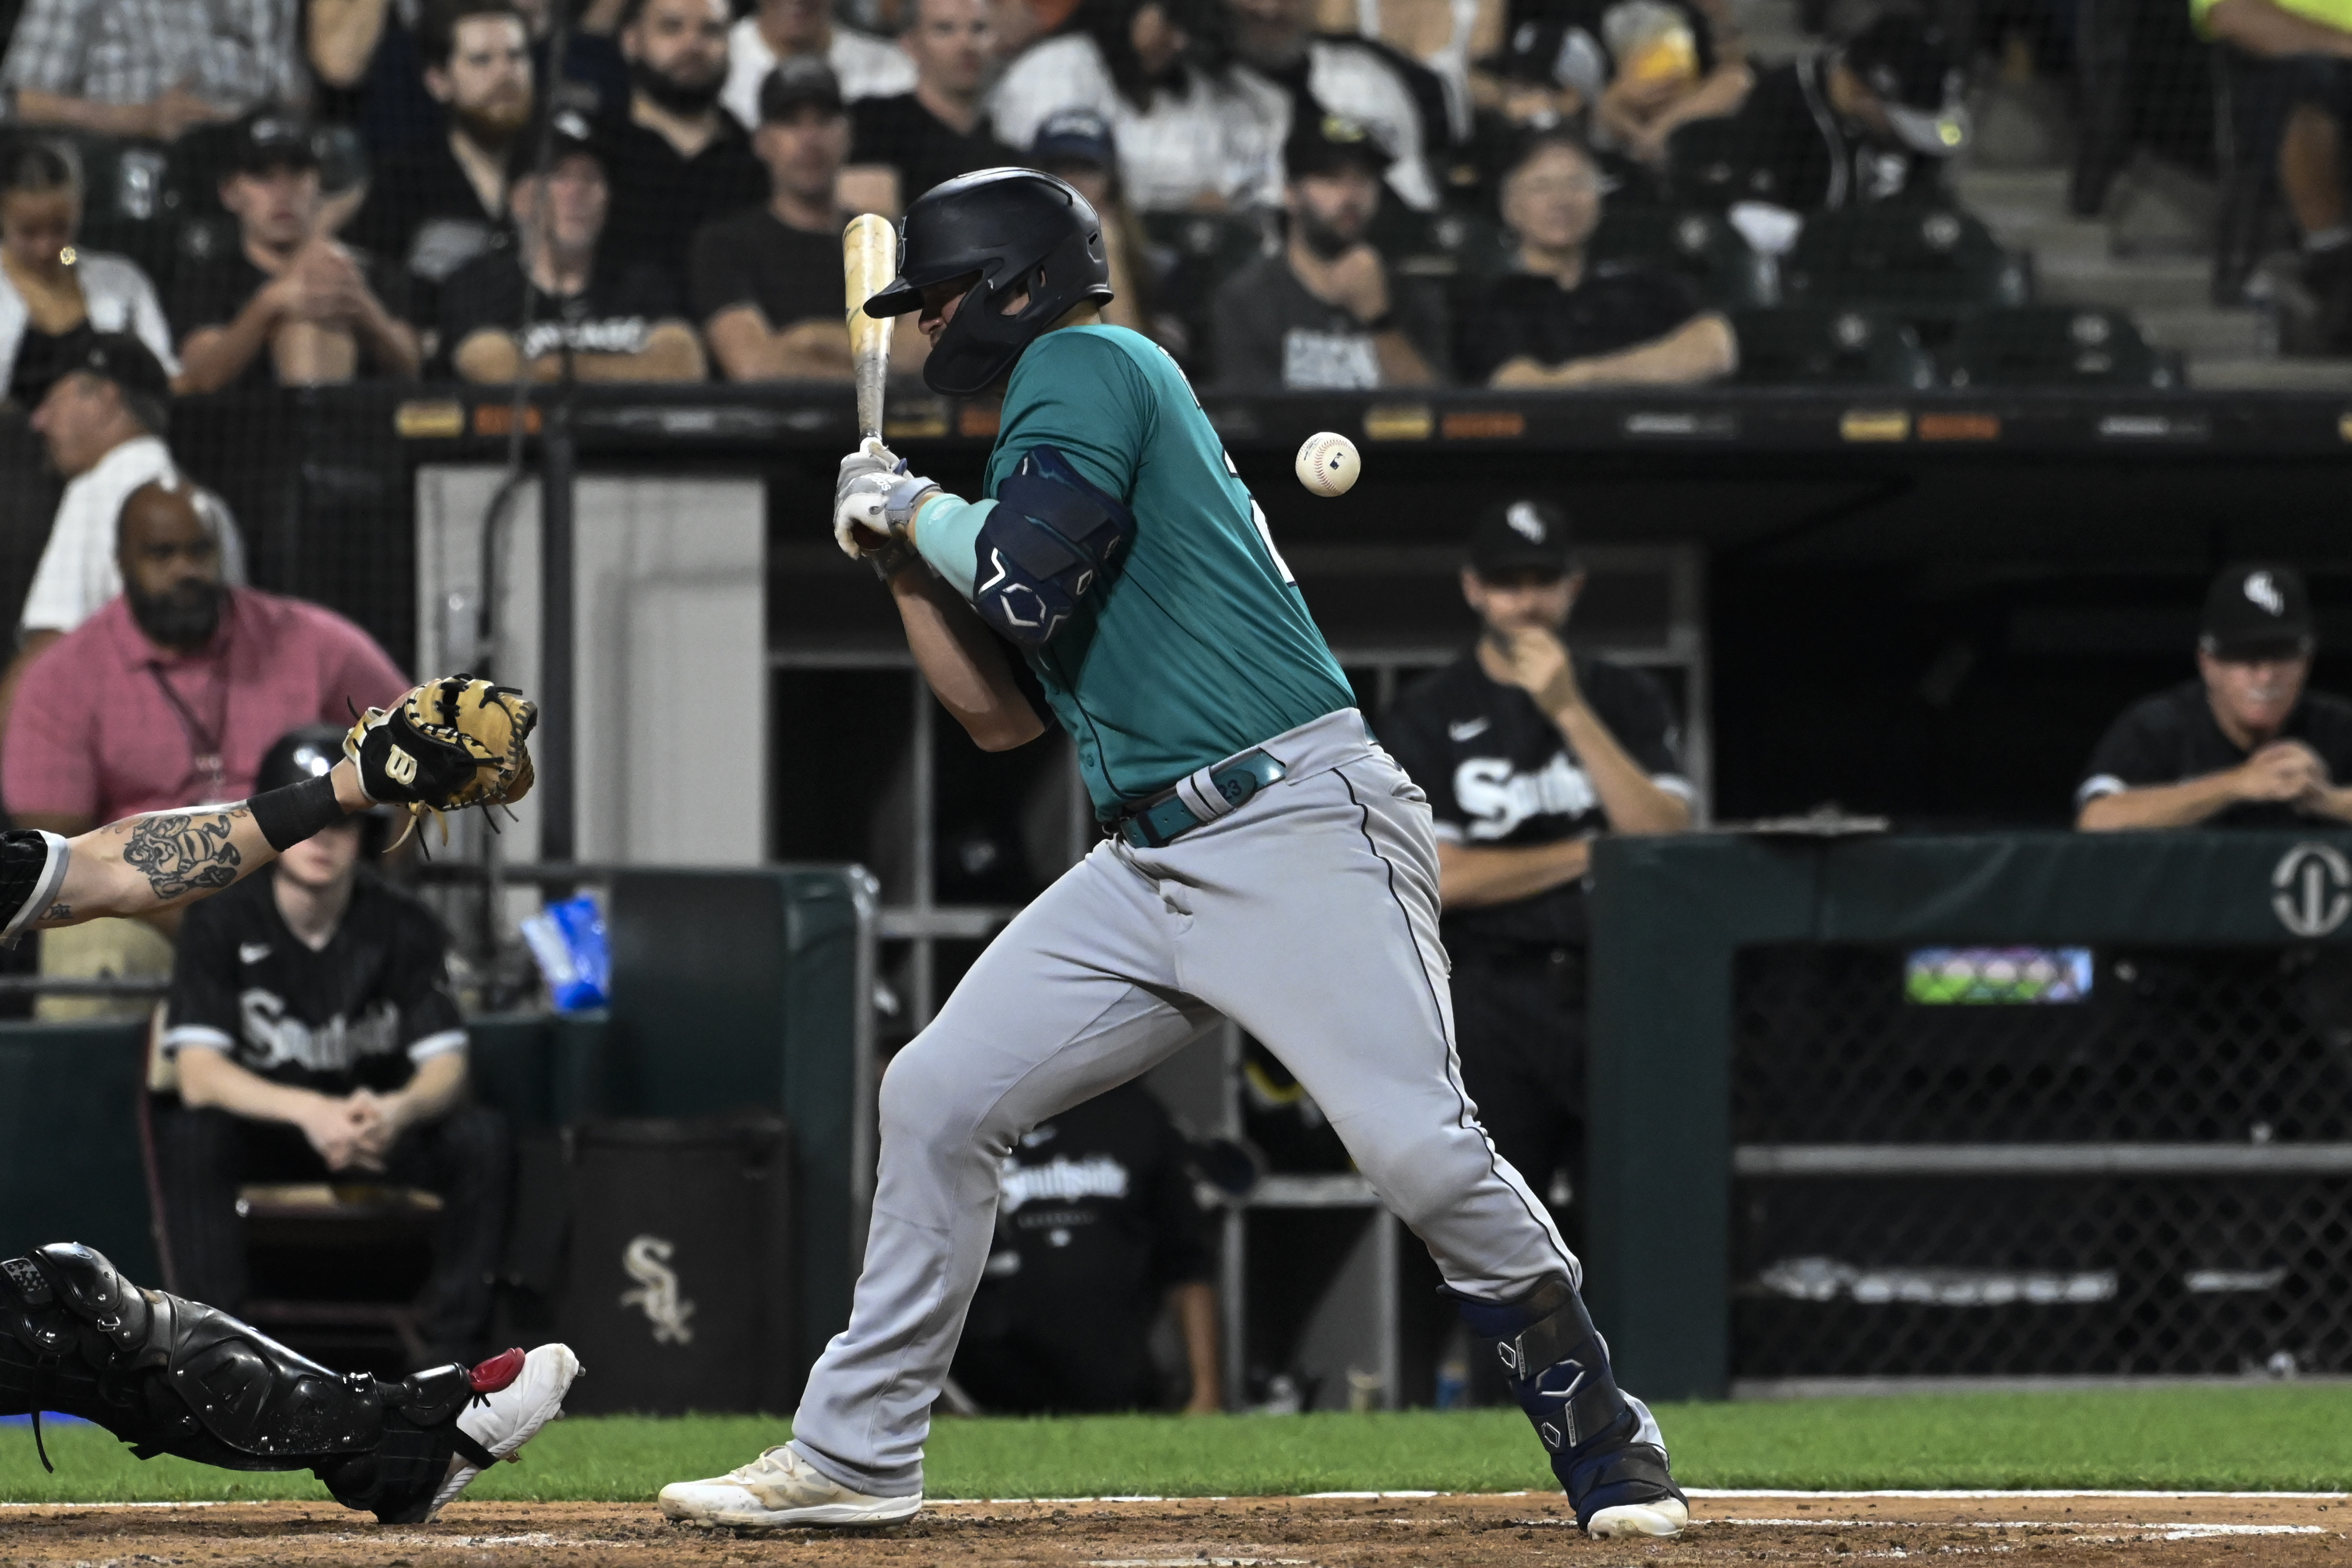 Cal Raleigh, Mariners dismantle White Sox 14-2